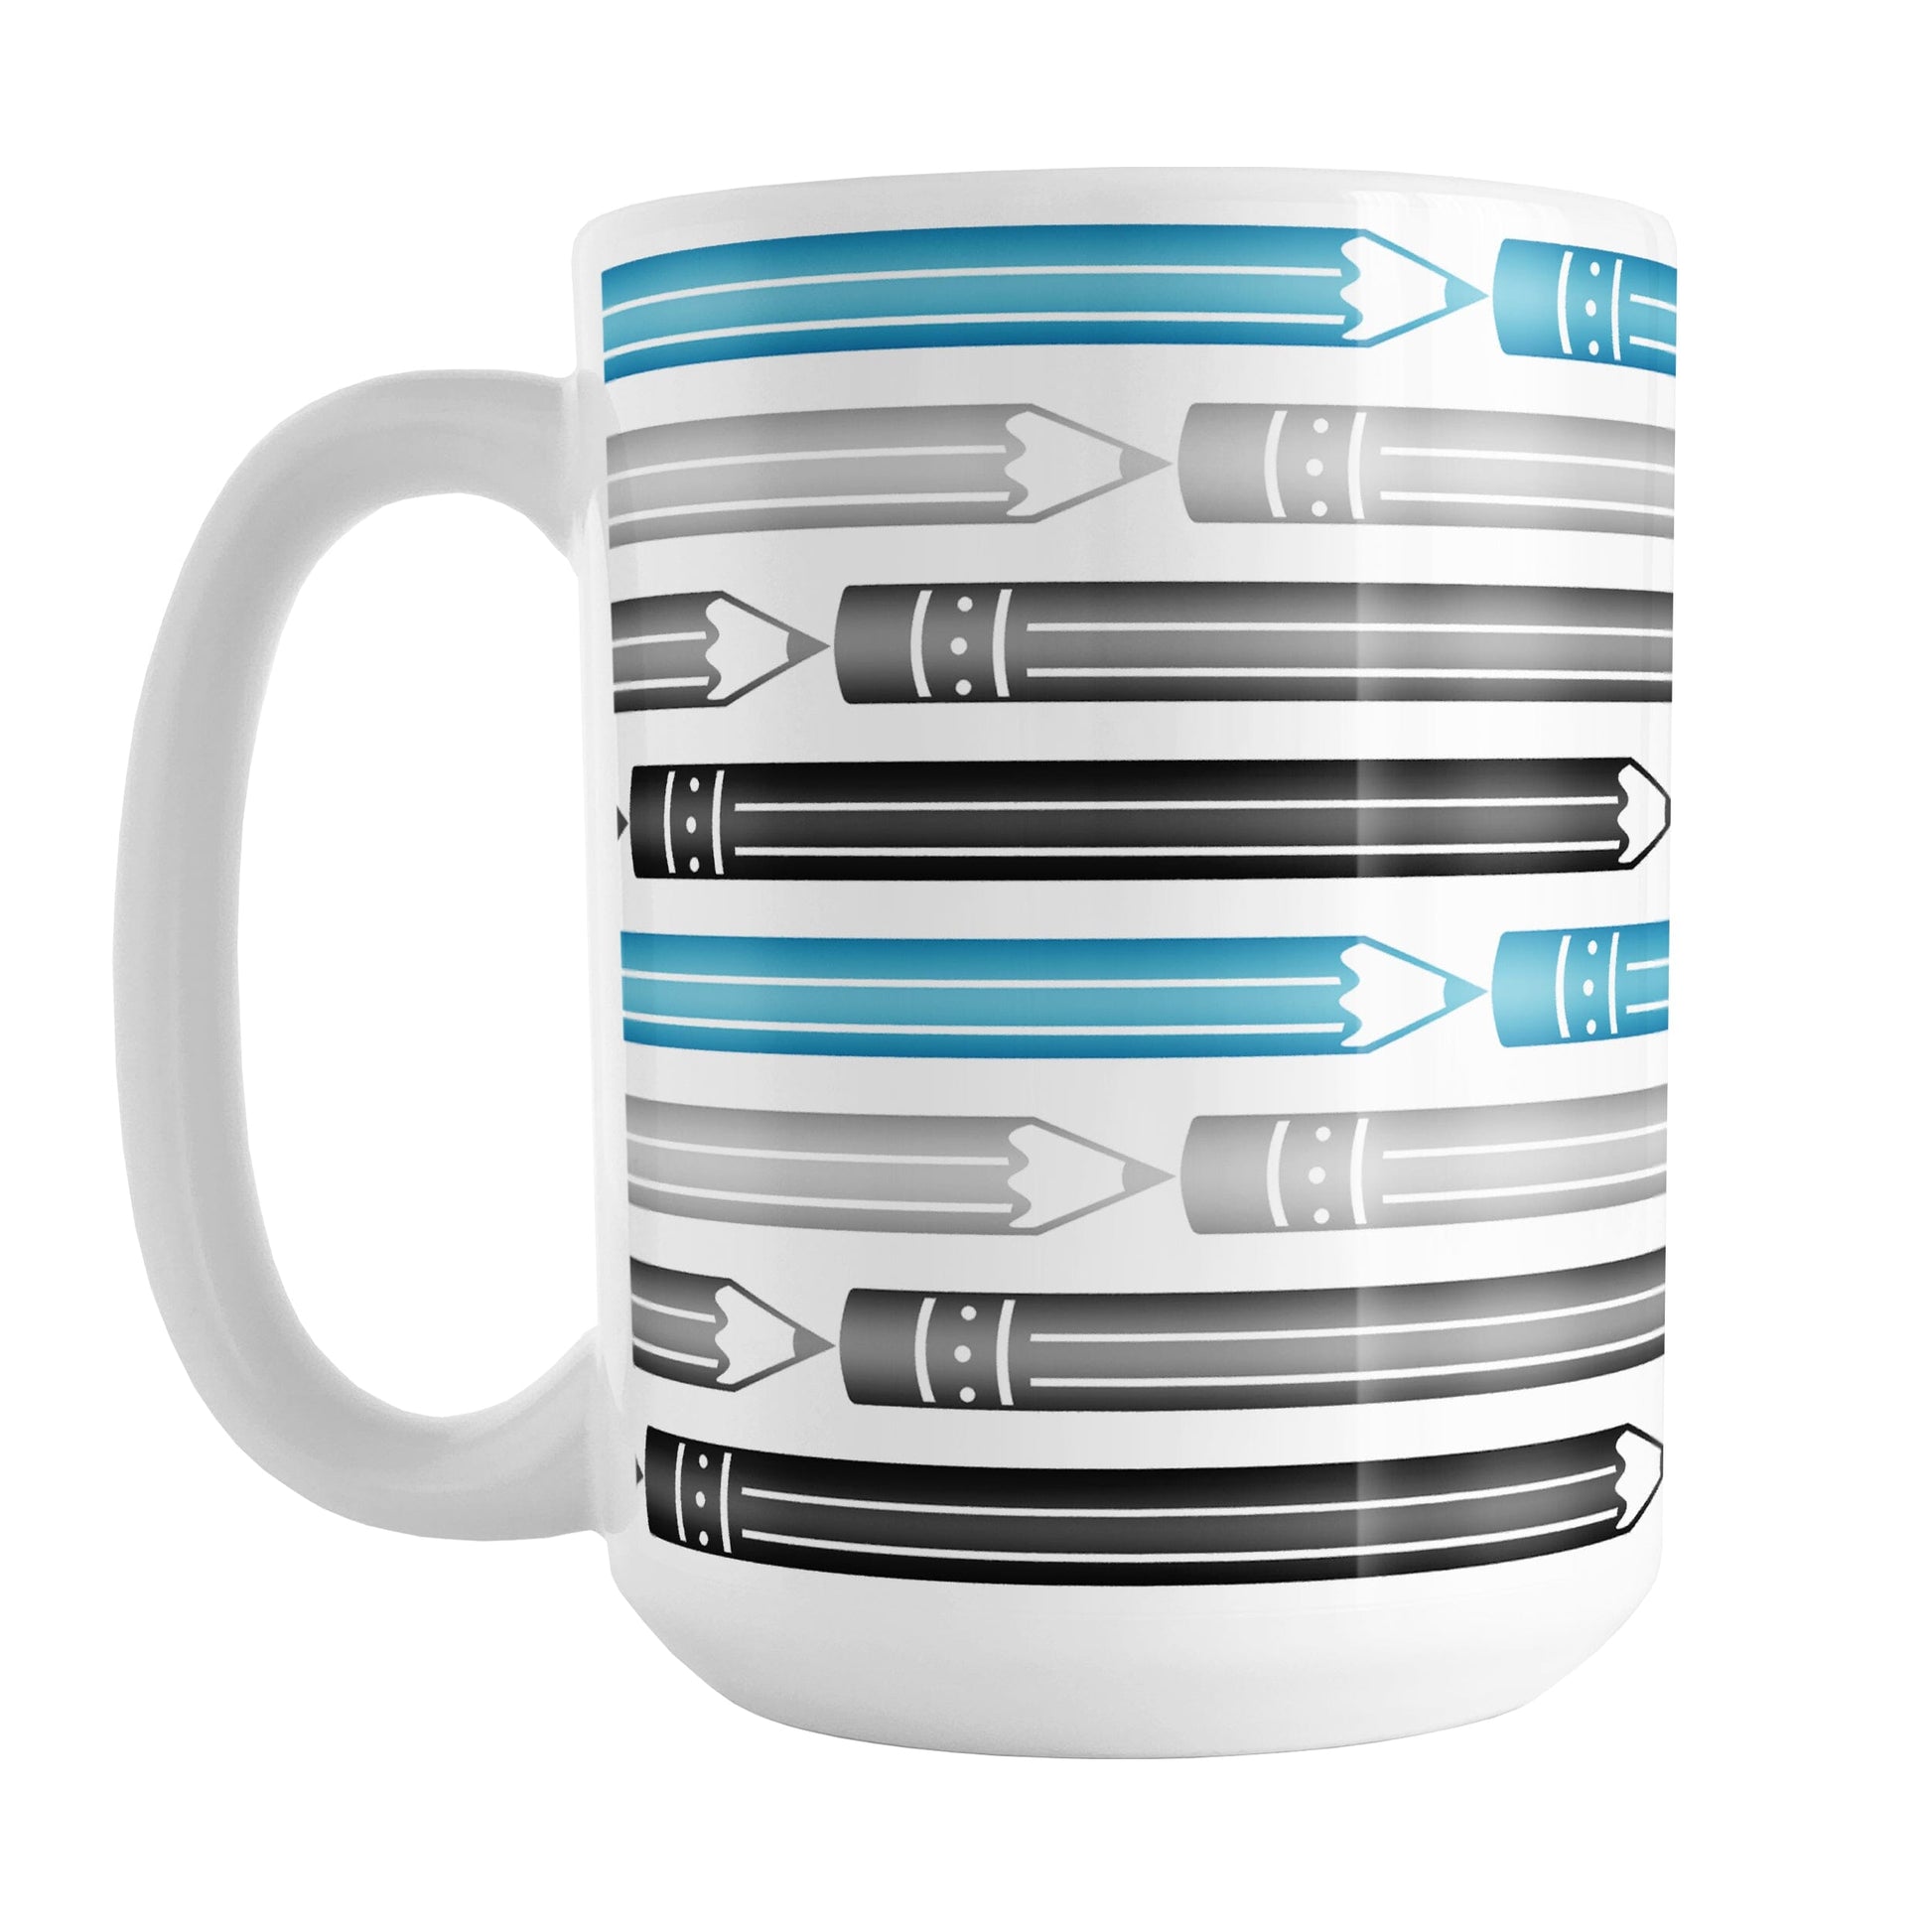 Blue Gray Black Pencils Pattern Mug (15oz) at Amy's Coffee Mugs. A ceramic coffee mug designed with a horizontal pencils in blue, gray, and black, stacked in a pattern that wraps around the mug to the handle.